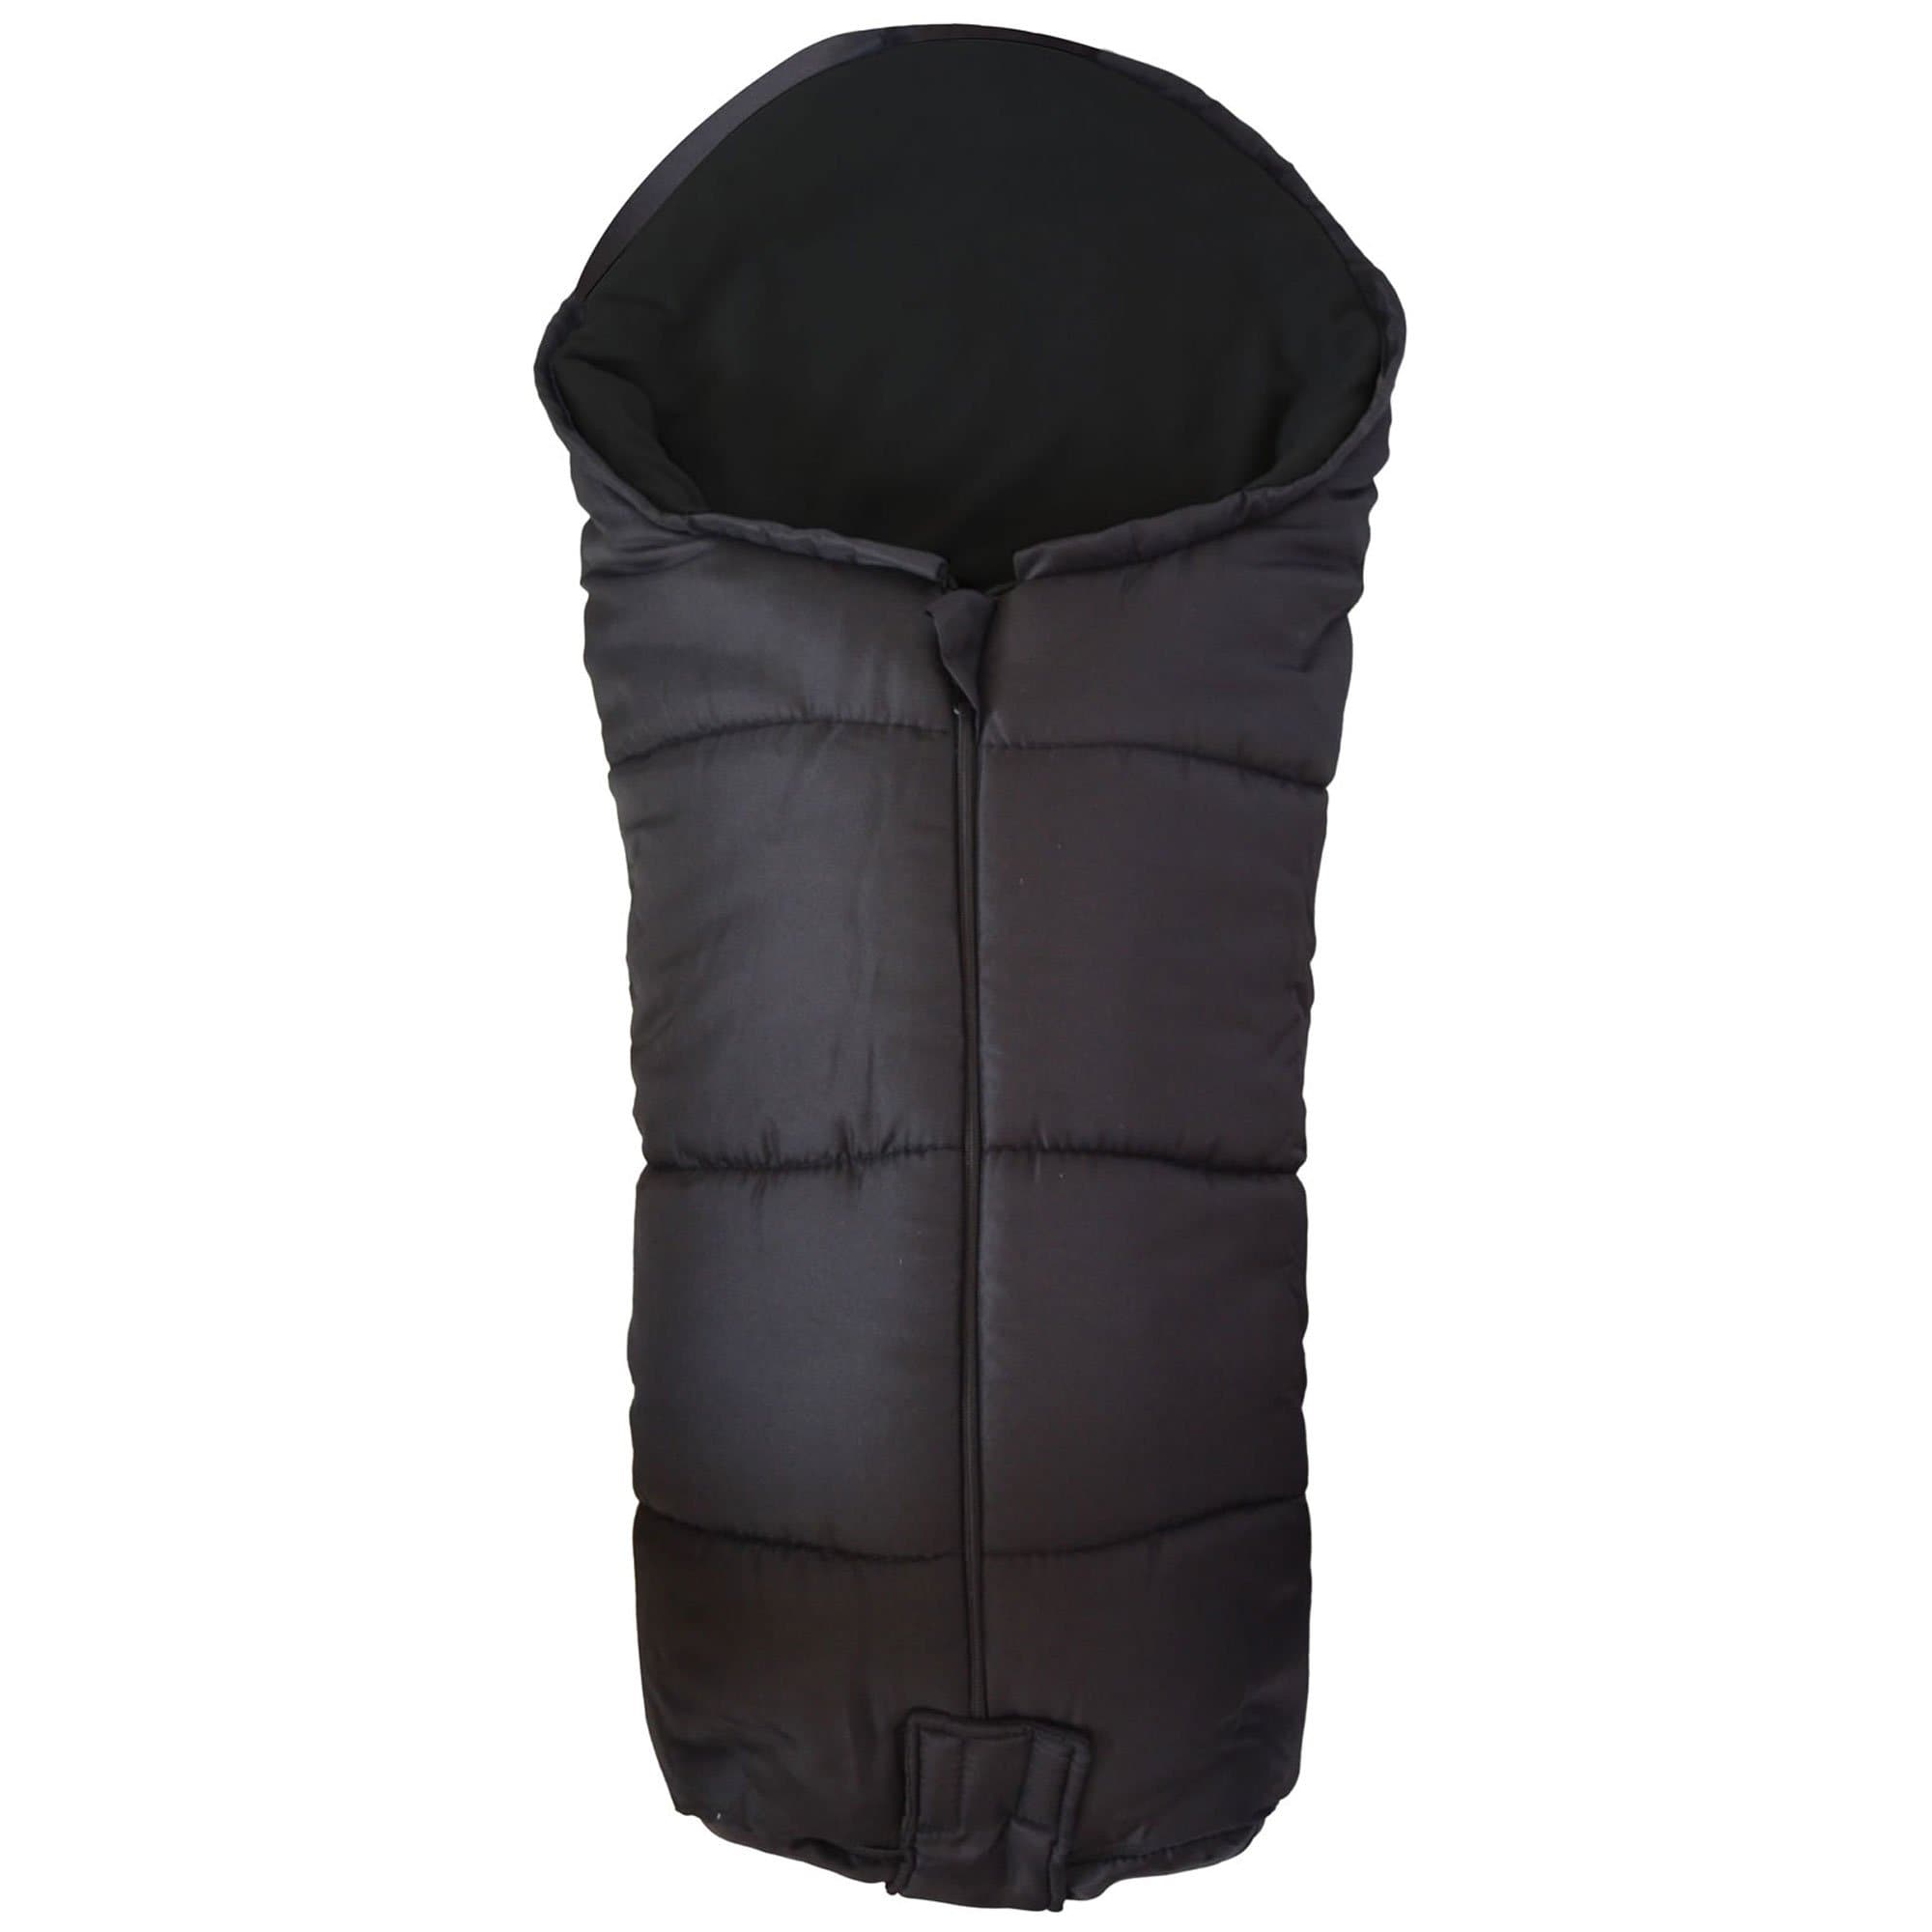 Deluxe Footmuff / Cosy Toes Compatible with Red Kite - Black / Fits All Models | For Your Little One